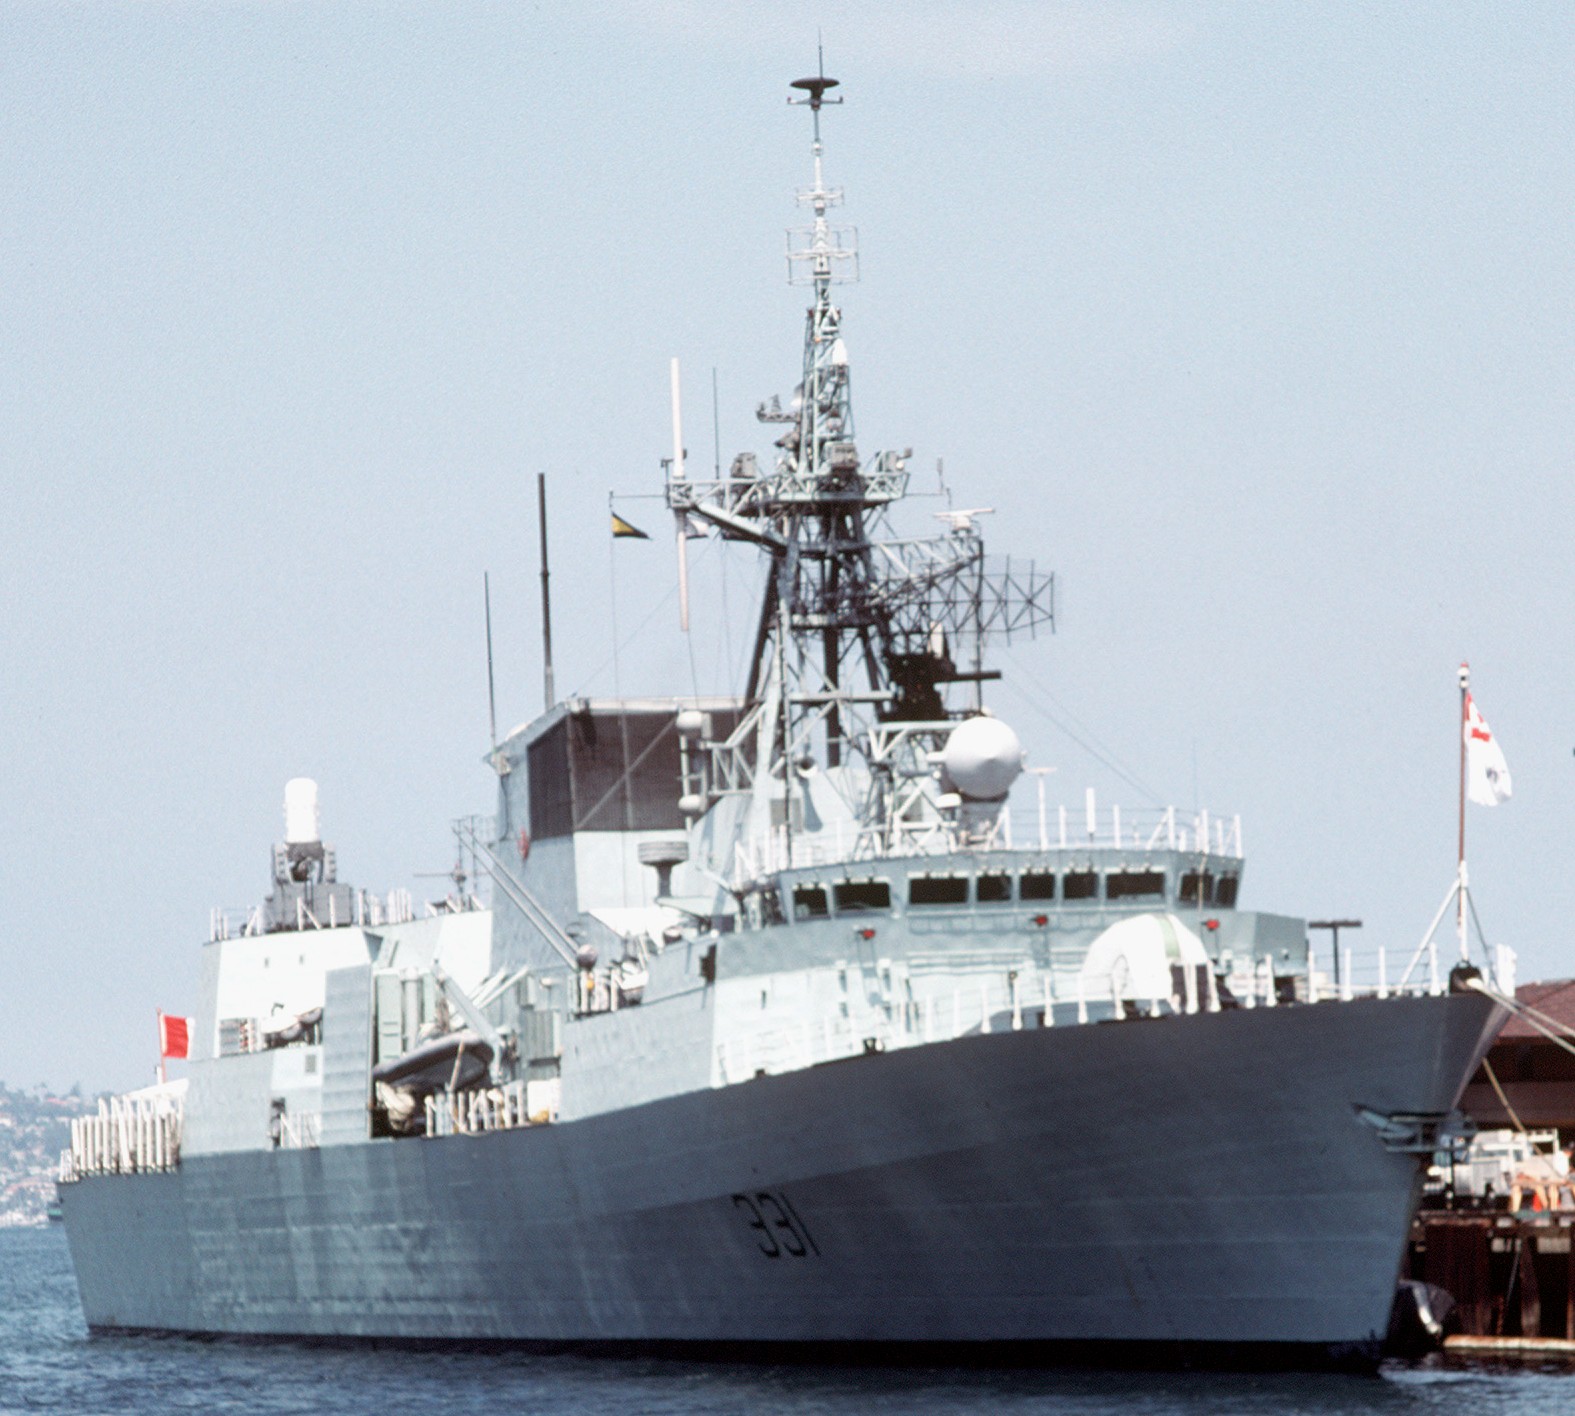 ffh-331 hmcs vancouver halifax class helicopter patrol frigate ncsm royal canadian navy 33